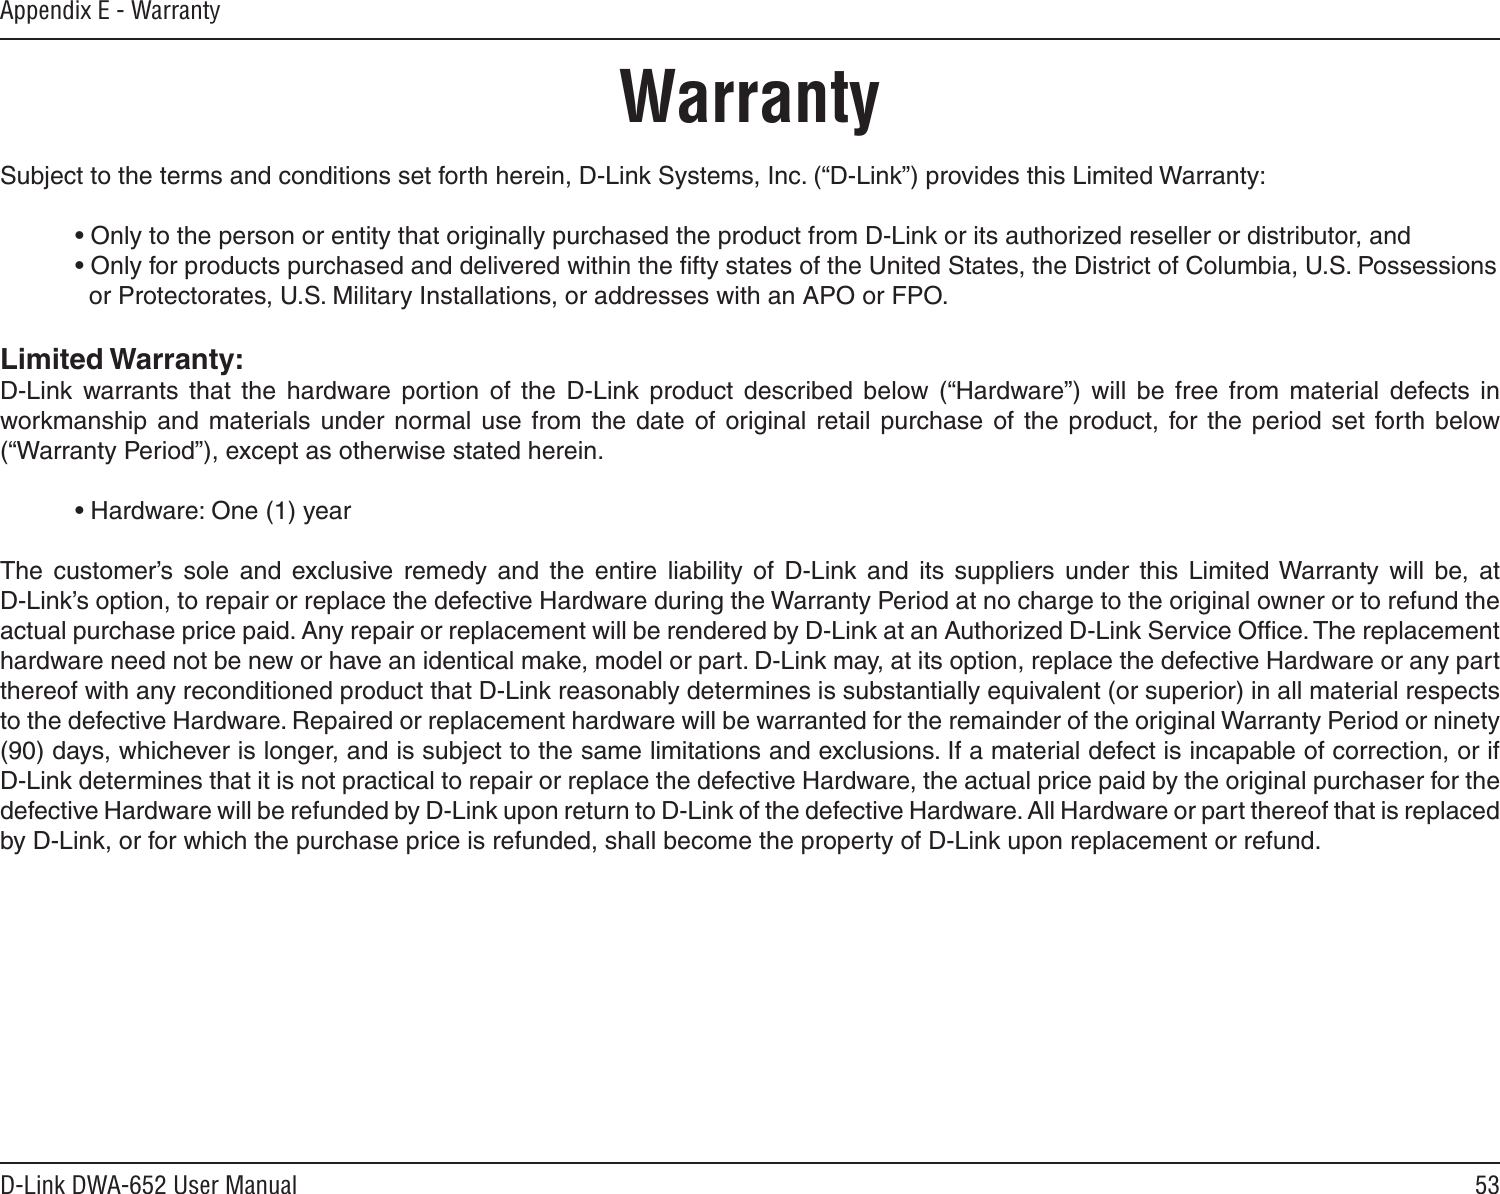 53D-Link DWA-652 User ManualAppendix E - WarrantyWarrantySubject to the terms and conditions set forth herein, D-Link Systems, Inc. (“D-Link”) provides this Limited Warranty:  • Only to the person or entity that originally purchased the product from D-Link or its authorized reseller or distributor, and  • Only for products purchased and delivered within the ﬁfty states of the United States, the District of Columbia, U.S. Possessions      or Protectorates, U.S. Military Installations, or addresses with an APO or FPO.Limited Warranty:D-Link  warrants  that  the  hardware  portion  of  the  D-Link  product  described  below  (“Hardware”)  will  be  free  from  material  defects  in workmanship  and  materials  under normal  use  from  the  date of  original  retail  purchase  of  the product,  for the  period  set forth  below (“Warranty Period”), except as otherwise stated herein.  • Hardware: One (1) yearThe  customer’s  sole  and  exclusive  remedy  and  the  entire  liability  of  D-Link  and  its  suppliers  under  this  Limited Warranty  will  be,  at  D-Link’s option, to repair or replace the defective Hardware during the Warranty Period at no charge to the original owner or to refund the actual purchase price paid. Any repair or replacement will be rendered by D-Link at an Authorized D-Link Service Ofﬁce. The replacement hardware need not be new or have an identical make, model or part. D-Link may, at its option, replace the defective Hardware or any part thereof with any reconditioned product that D-Link reasonably determines is substantially equivalent (or superior) in all material respects to the defective Hardware. Repaired or replacement hardware will be warranted for the remainder of the original Warranty Period or ninety (90) days, whichever is longer, and is subject to the same limitations and exclusions. If a material defect is incapable of correction, or if D-Link determines that it is not practical to repair or replace the defective Hardware, the actual price paid by the original purchaser for the defective Hardware will be refunded by D-Link upon return to D-Link of the defective Hardware. All Hardware or part thereof that is replaced by D-Link, or for which the purchase price is refunded, shall become the property of D-Link upon replacement or refund.